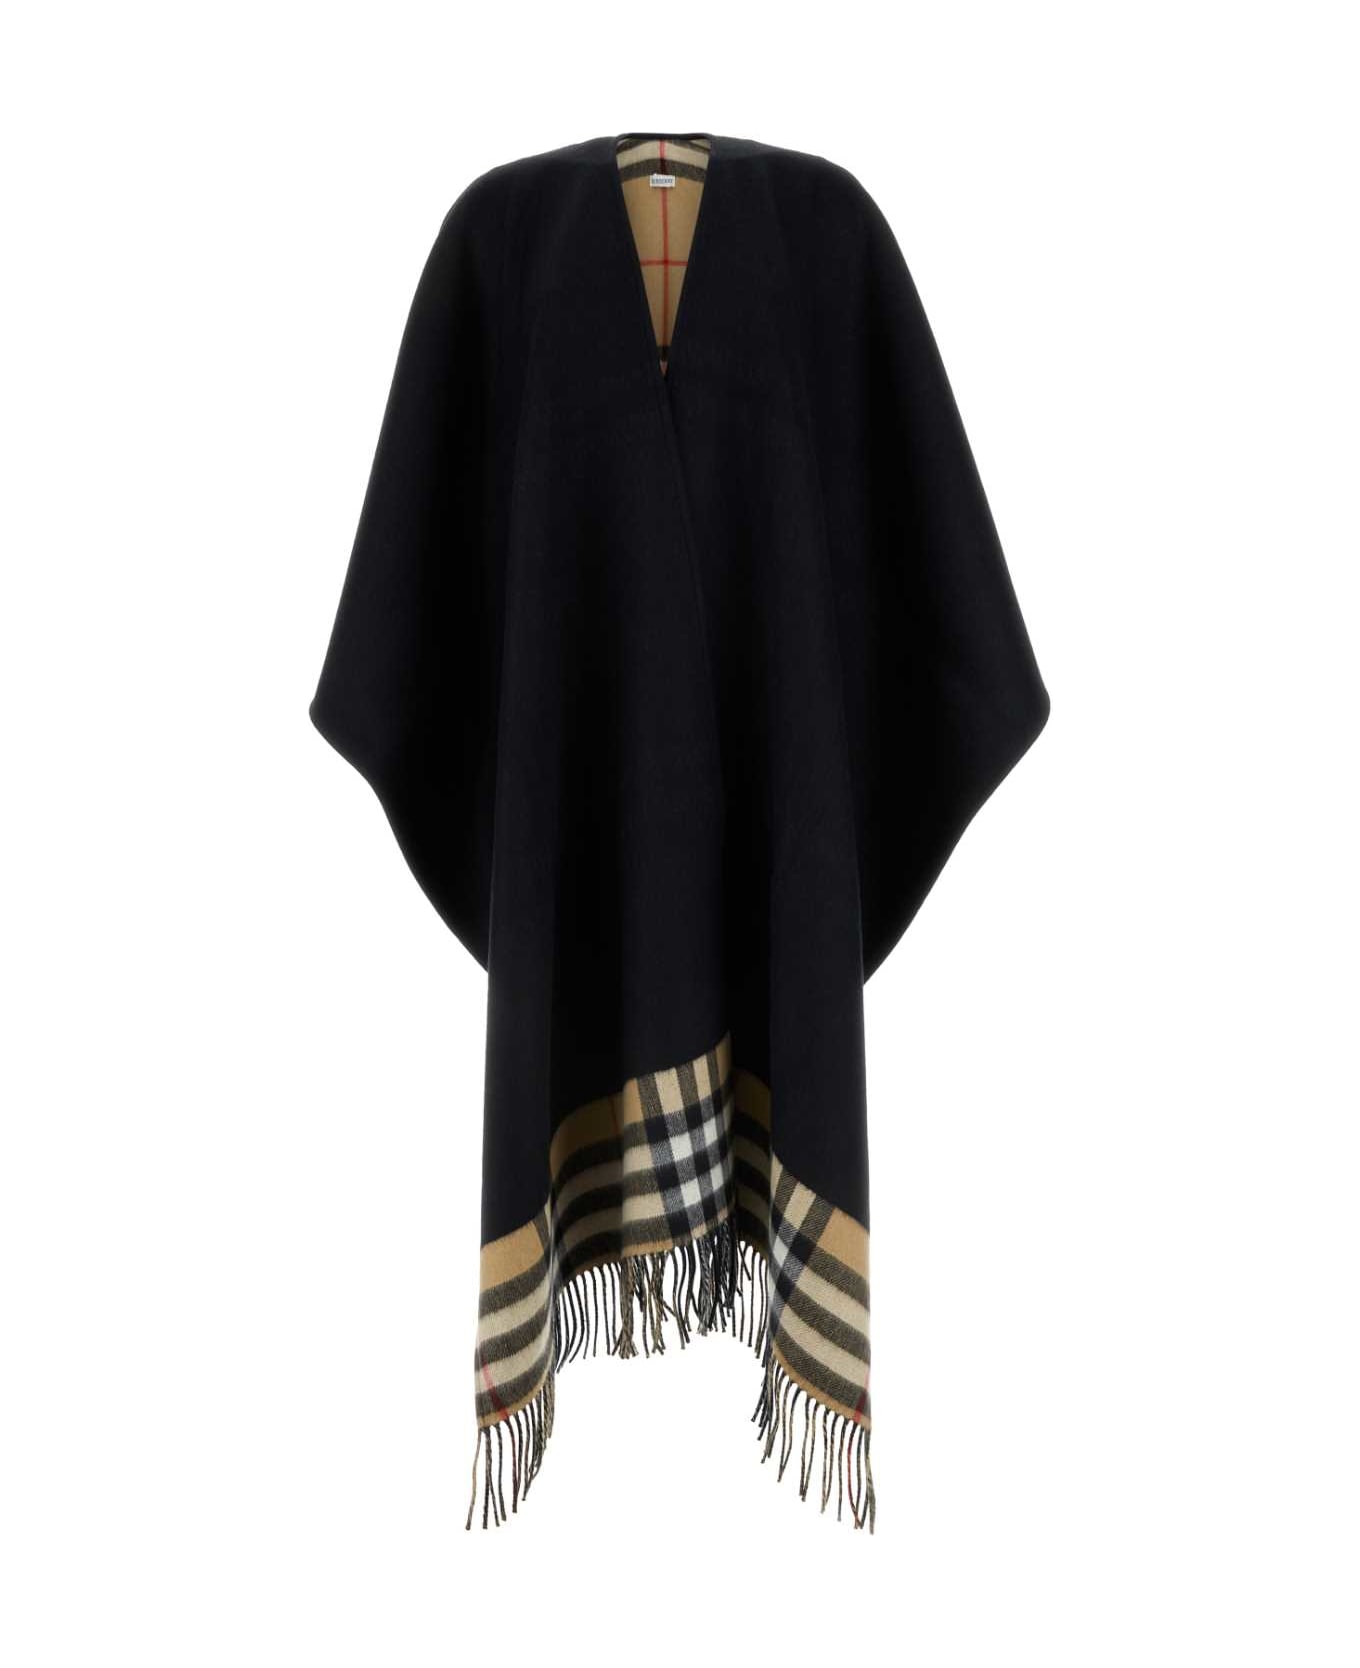 Burberry Black Cashmere And Wool Cape - BLACK